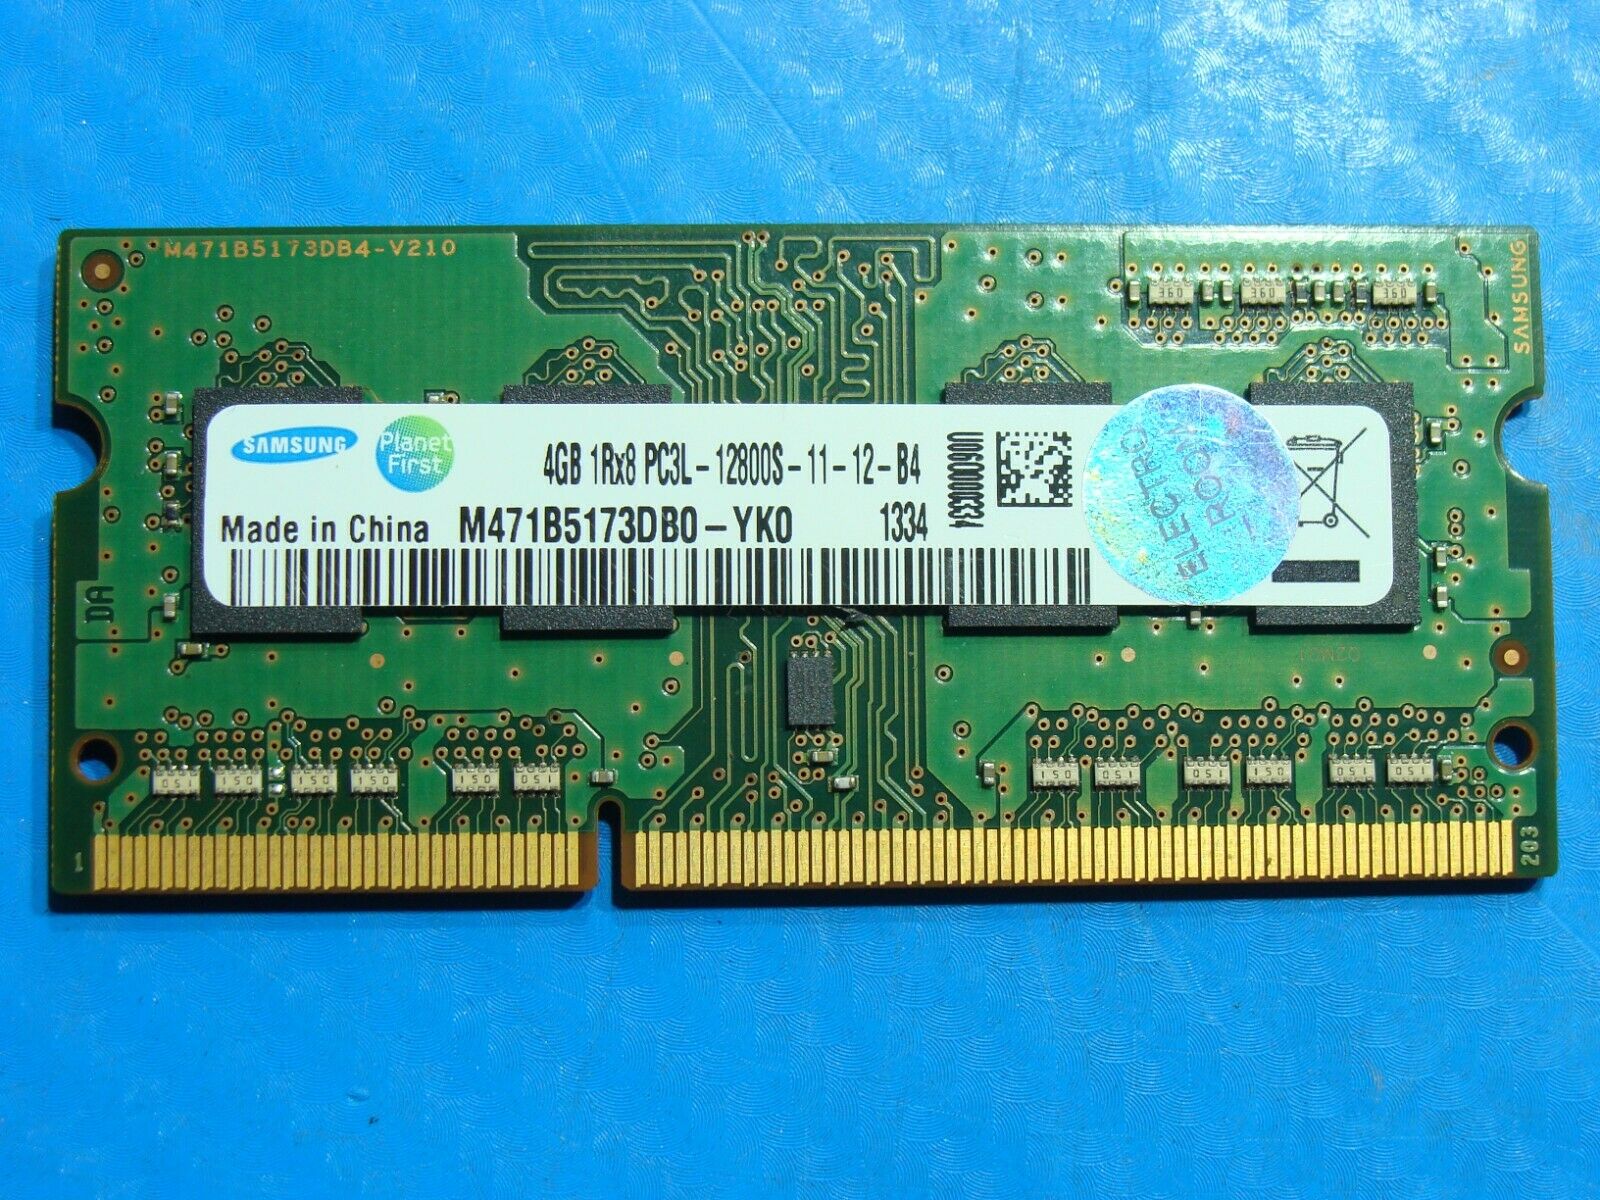 Dell 15-3521 Samsung 4GB SO-DIMM Memory RAM PC3L-12800S M471B5173DB0-YK0 - Laptop Parts - Buy Authentic Computer Parts - Top Seller Ebay